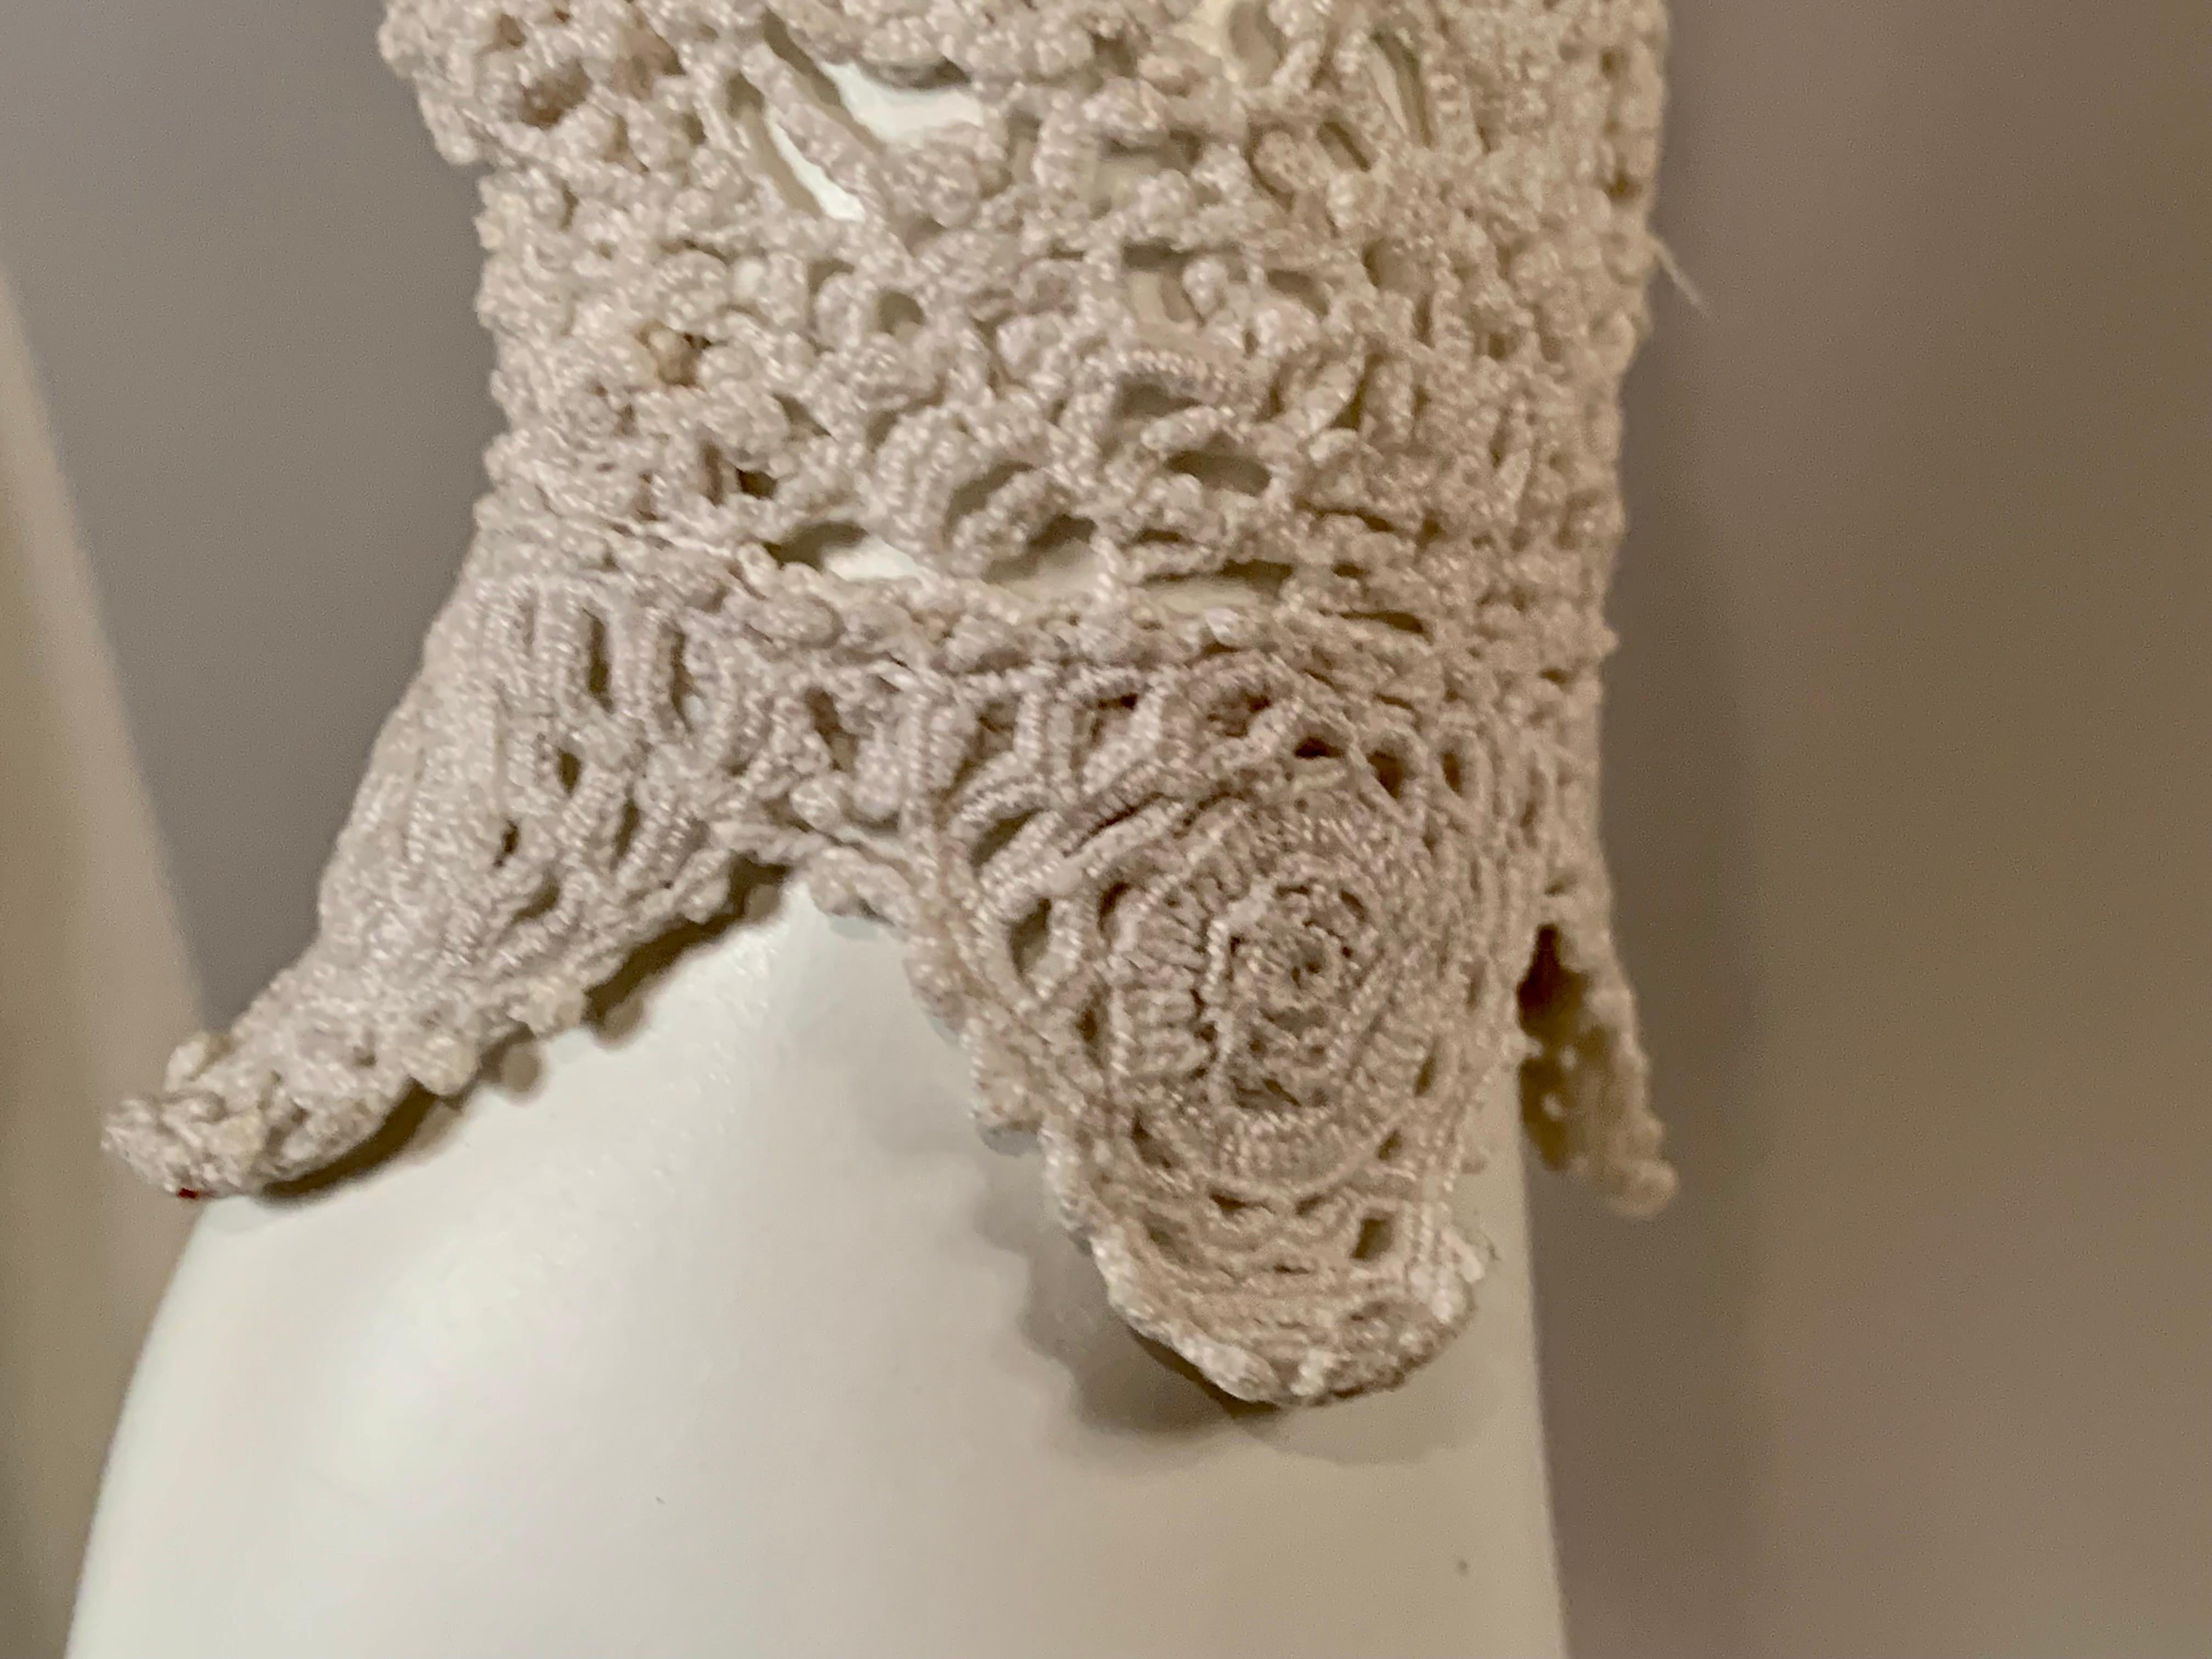 Antique Hand Crocheted Irish Lace Blouse with Flowers and Shamrocks 3